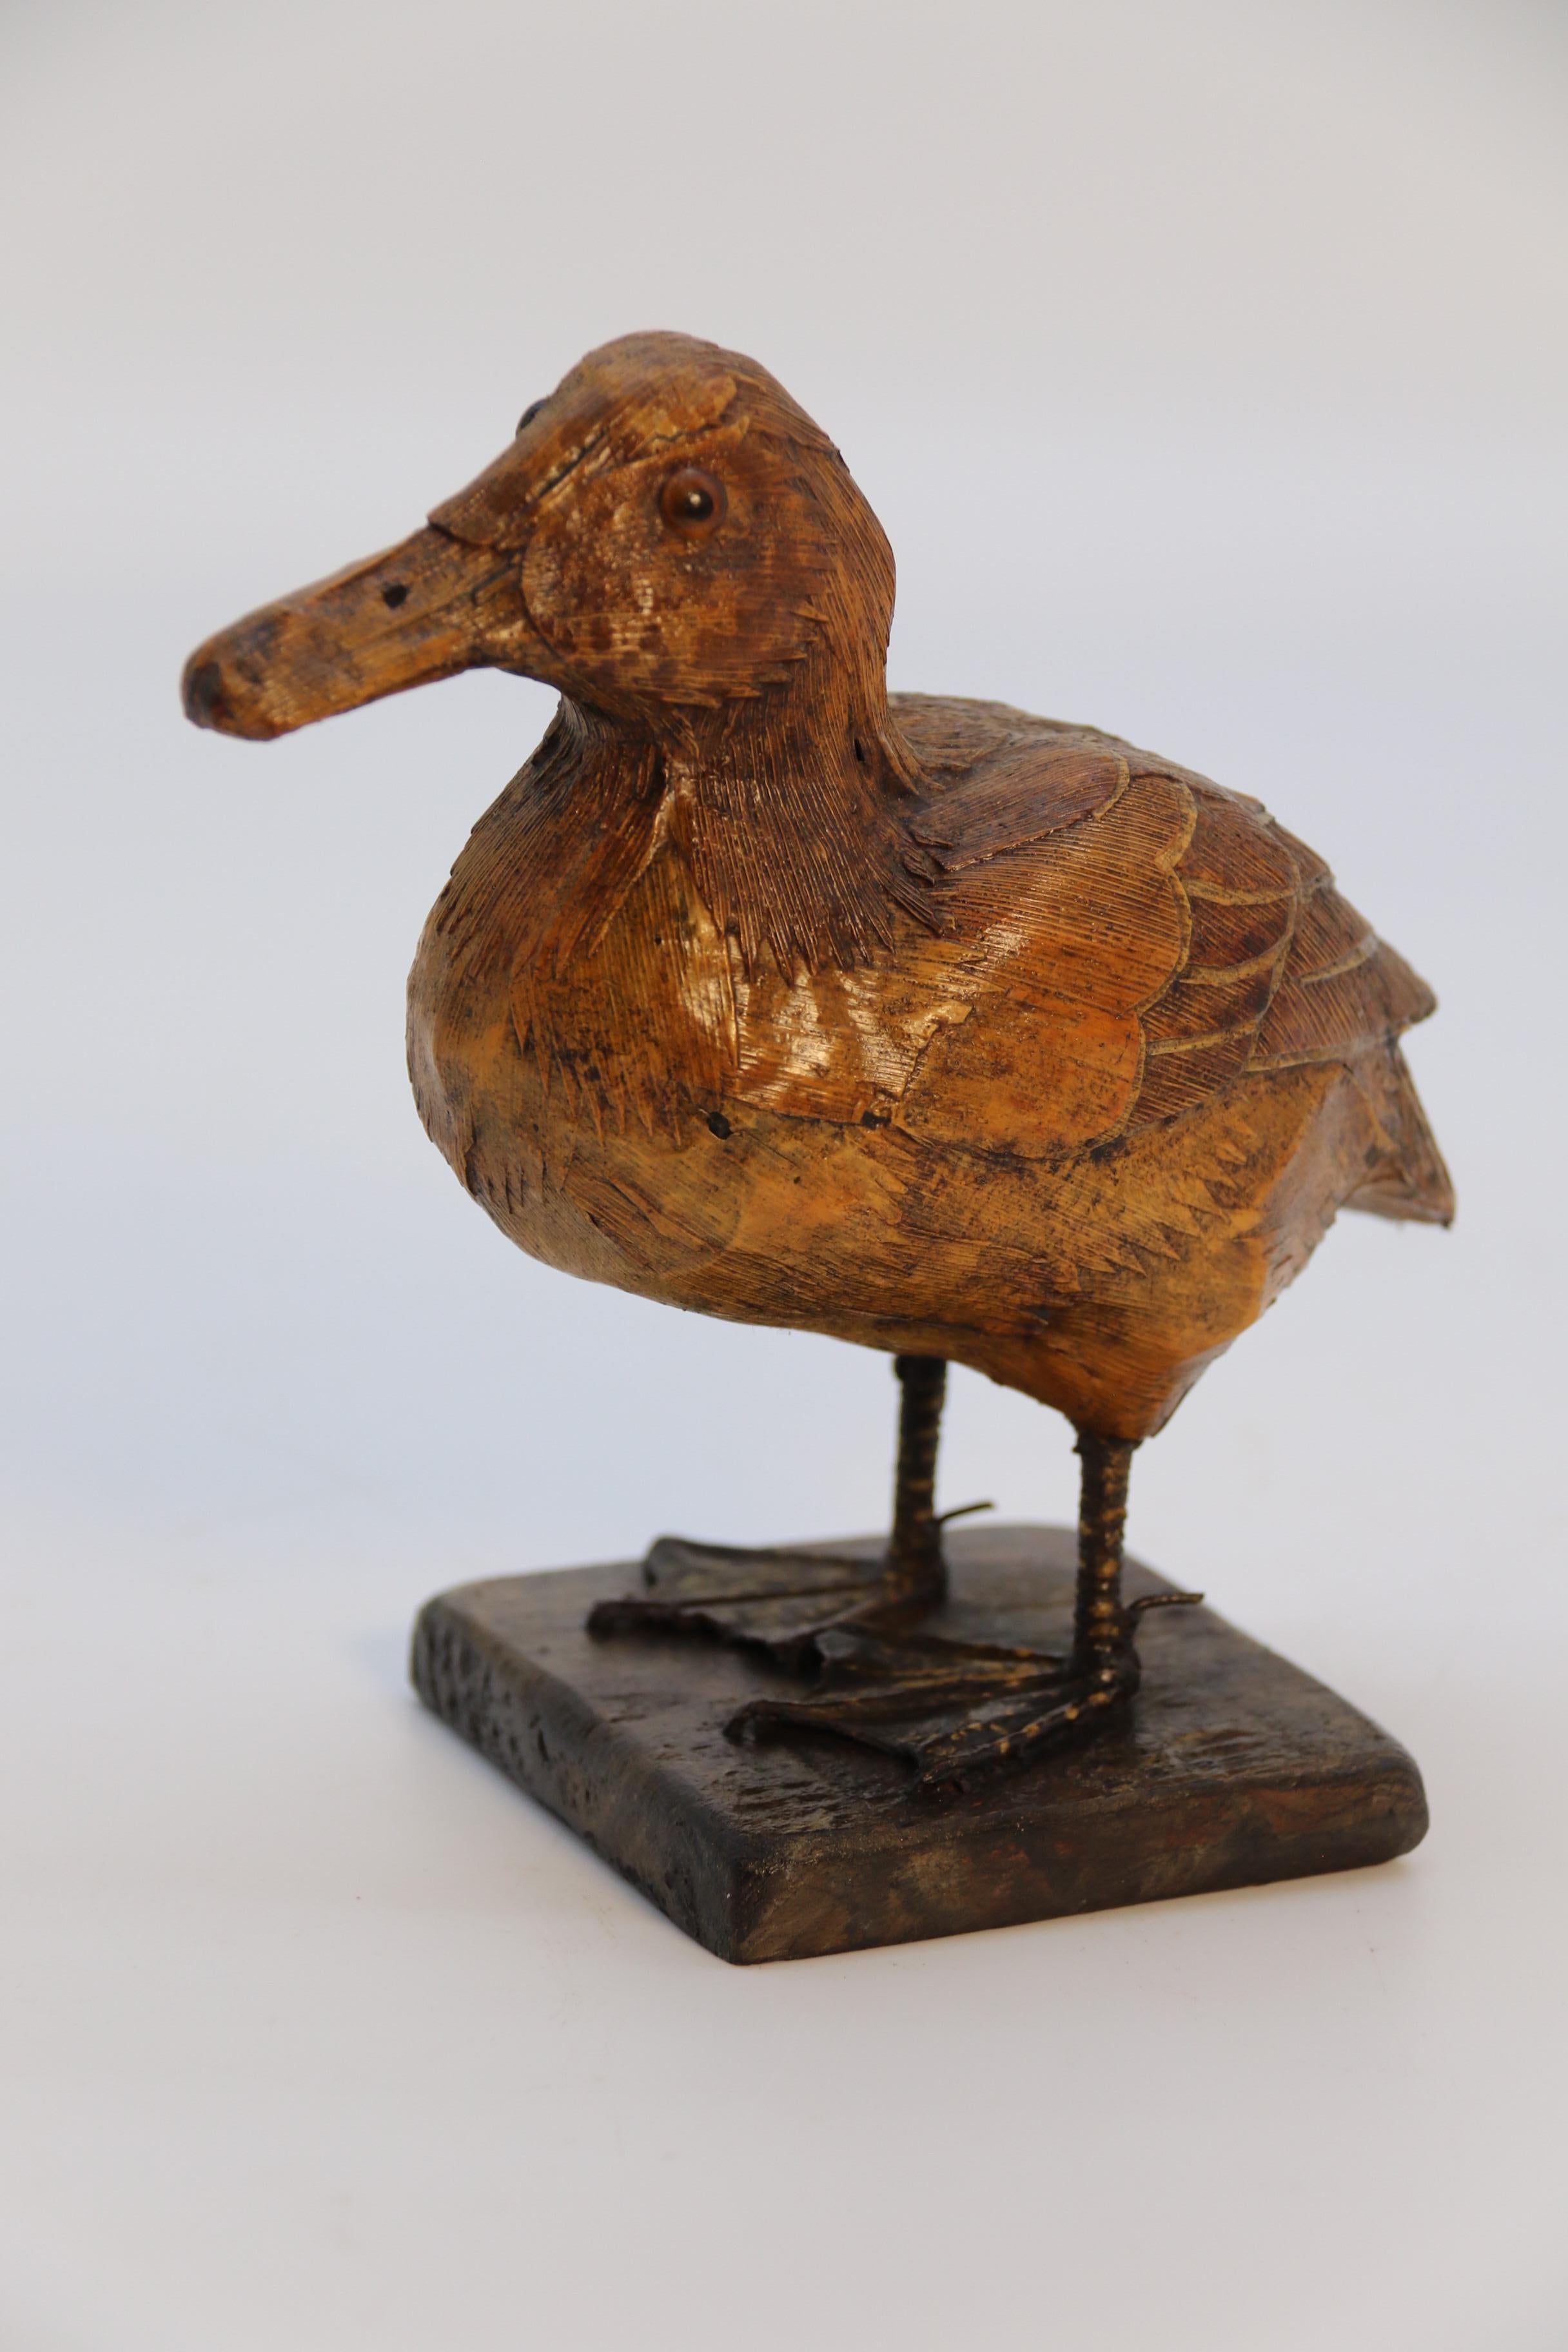 This most rare and unusual folk art study of a duckling is remarkable in its fine detail.  It is constructed of papier mâché which is then been veneered with cut and shaped straw which shows all of the different layered feathers. The eyes are made